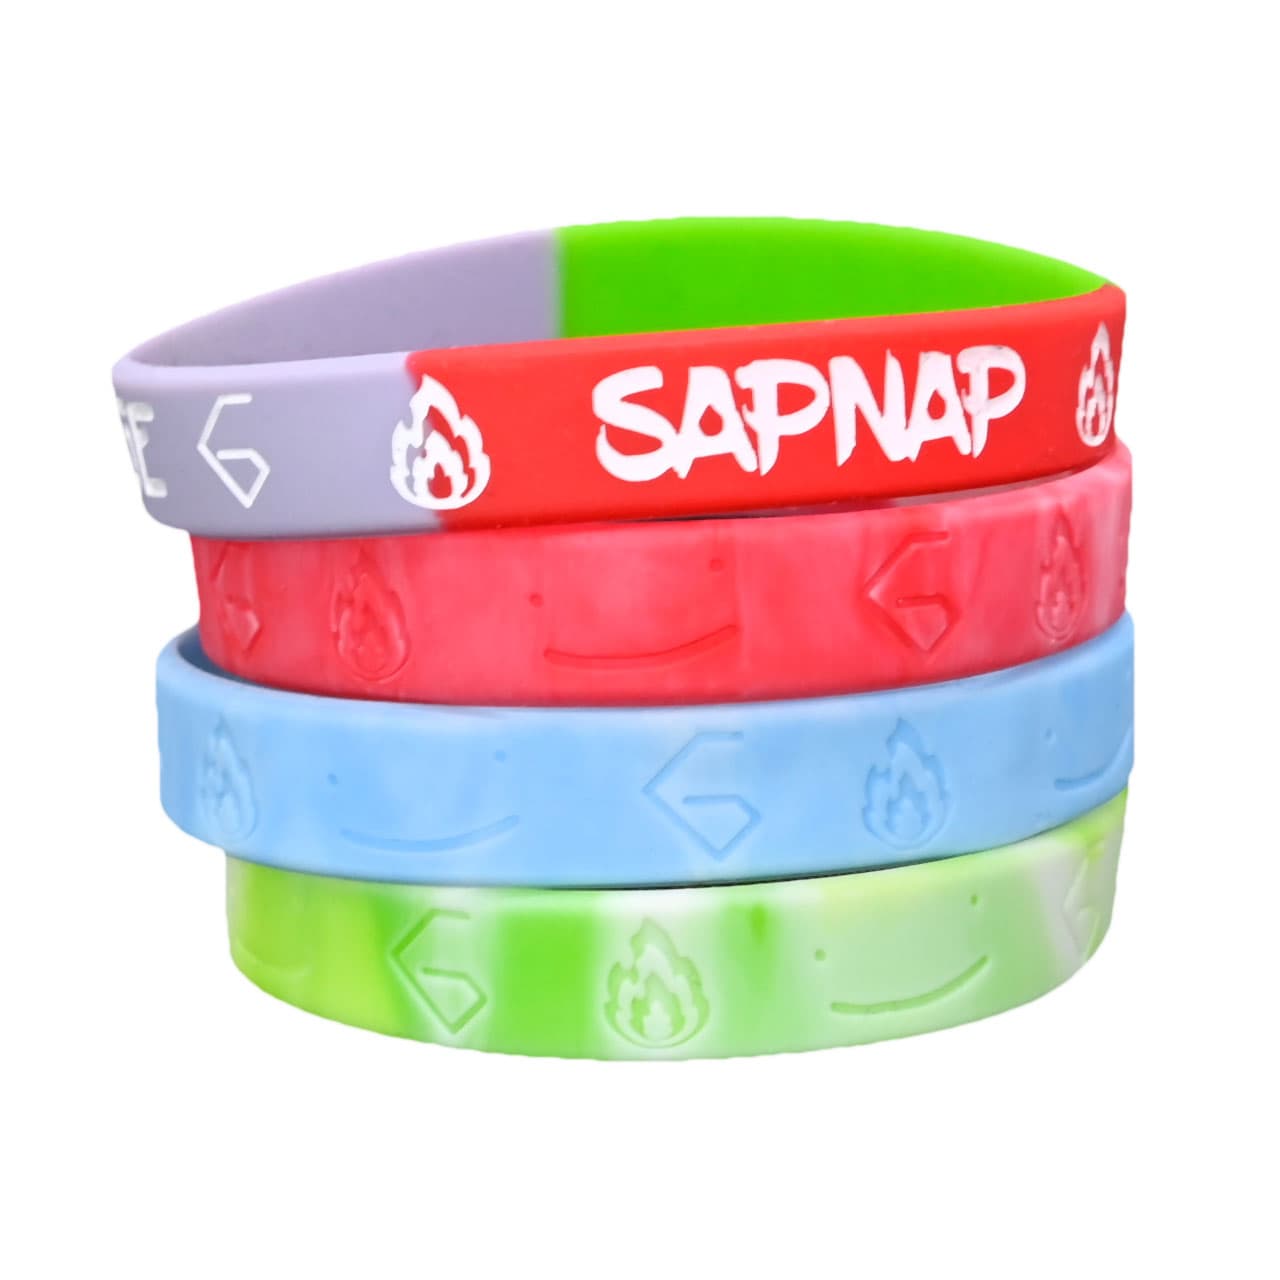 Dream Team Exclusive Not So Swirly Wristbands 4-Pack